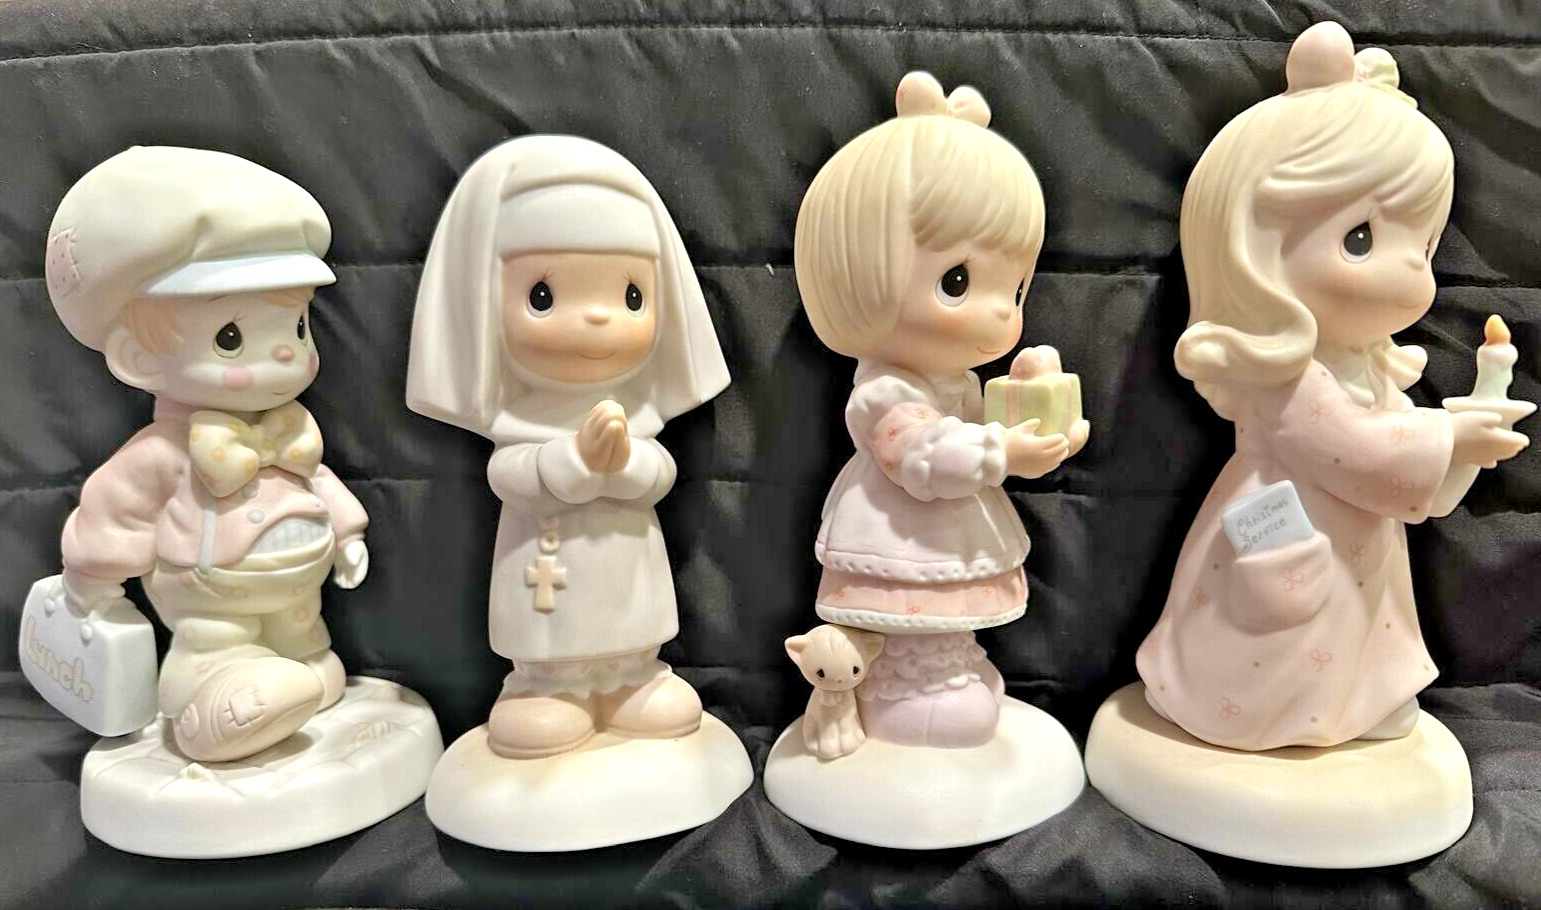 4 precious moments figurines get into the habit of prayer